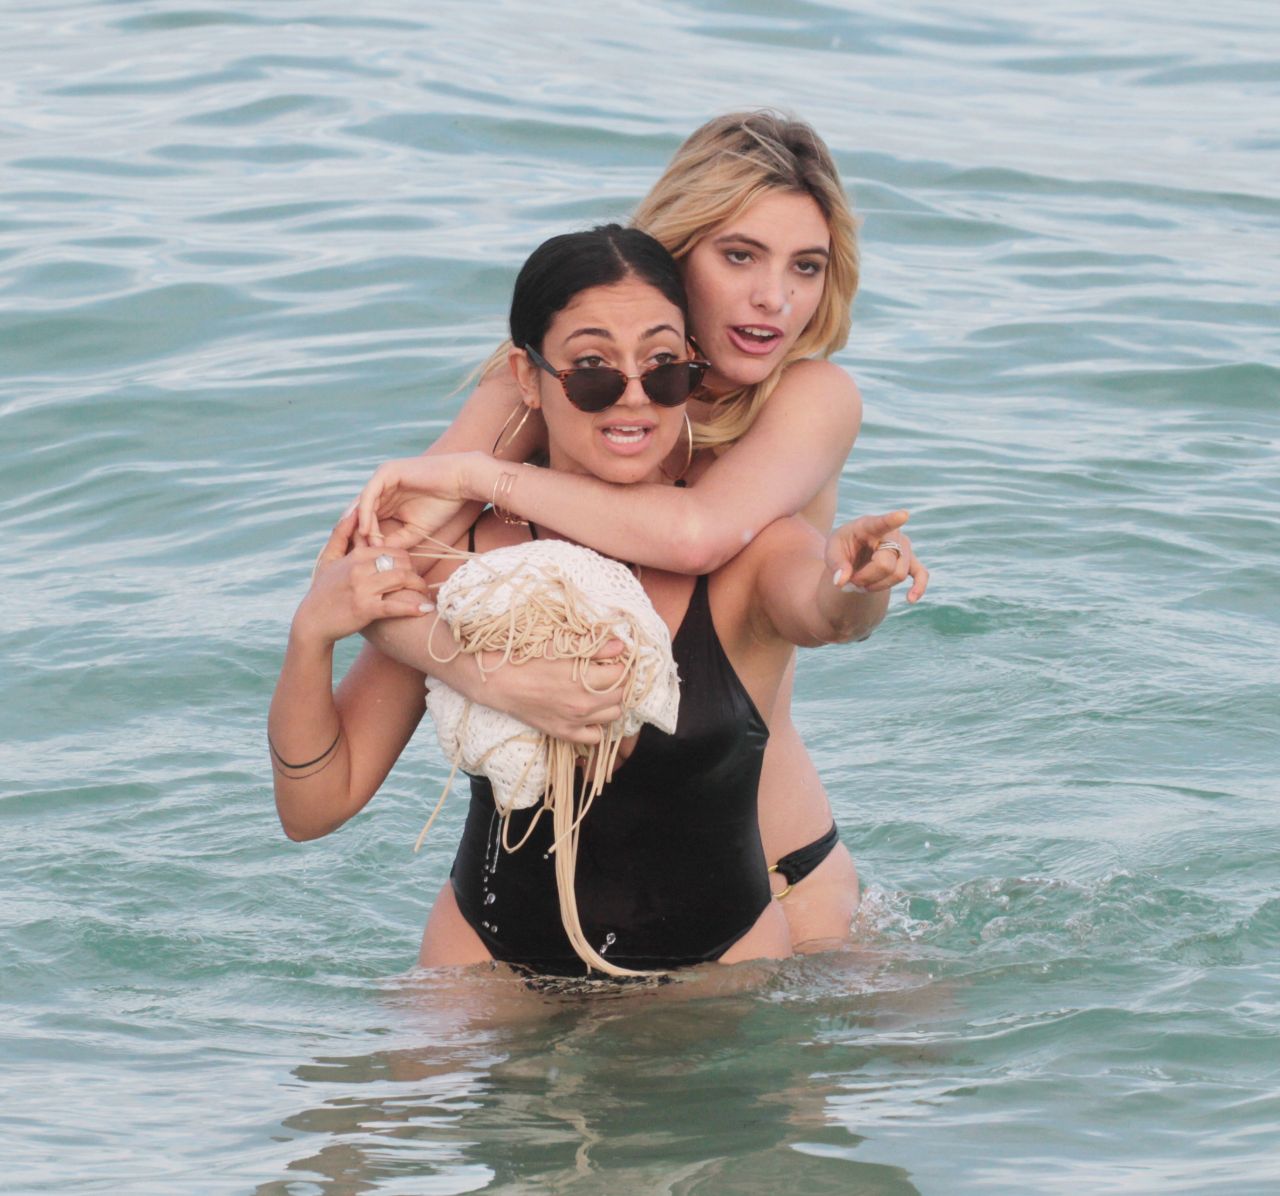 lele-pons-and-inanna-on-the-beach-in-miami-beach-8.jpg